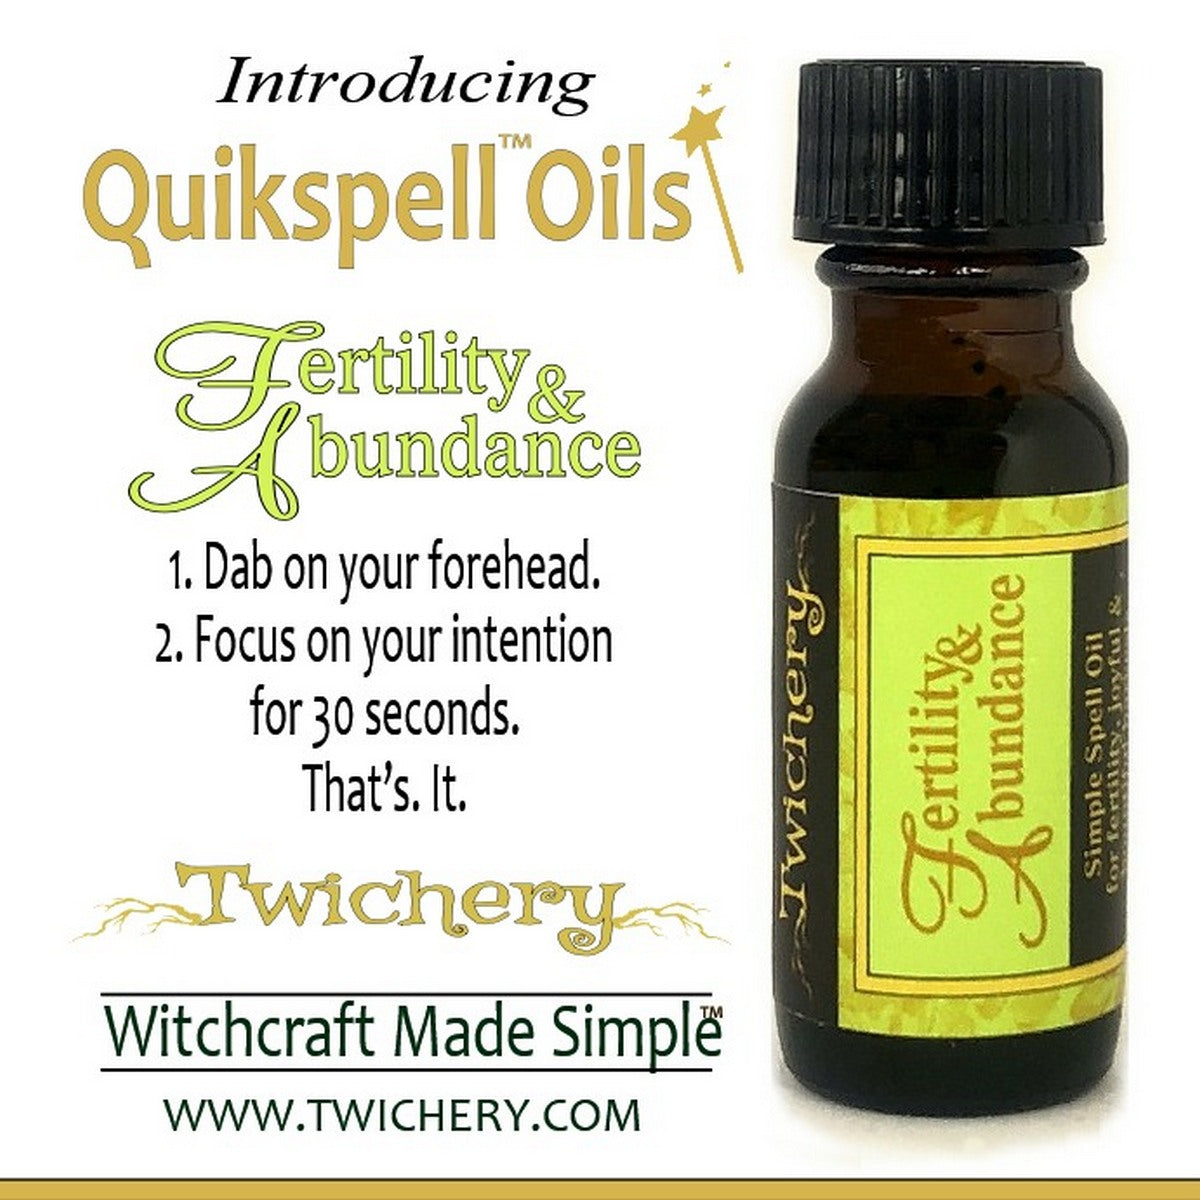 Twichery Fertility & Abundance Quikspell Oil is your one-dab fertility ritual, hoodoo, voodoo, wicca, pagan, Witchcraft Made Simple